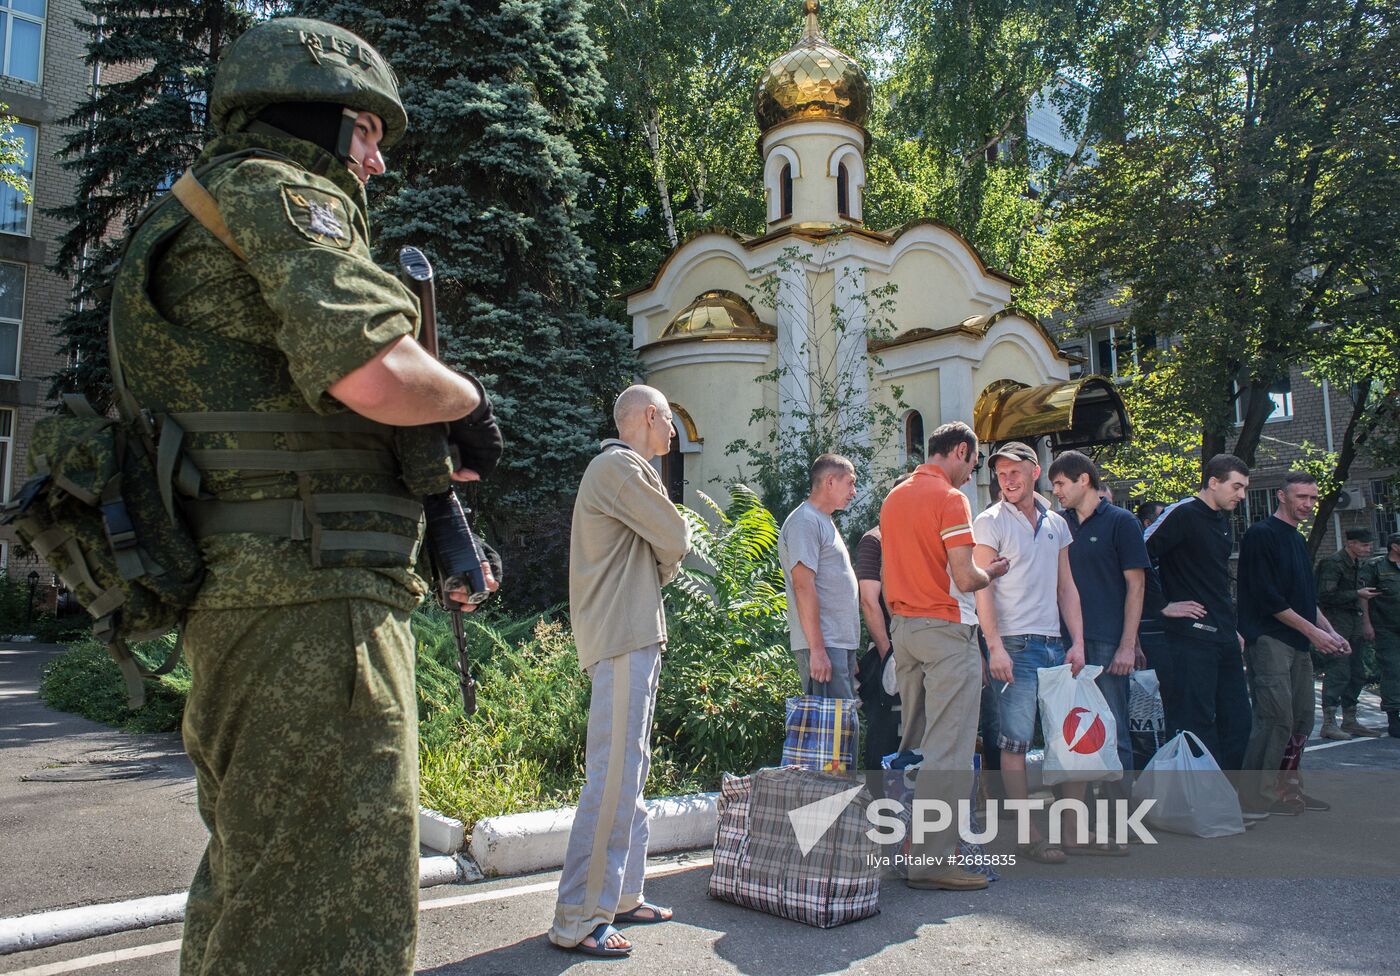 Donetsk People's Republic transfers captured soldiers to Kiev